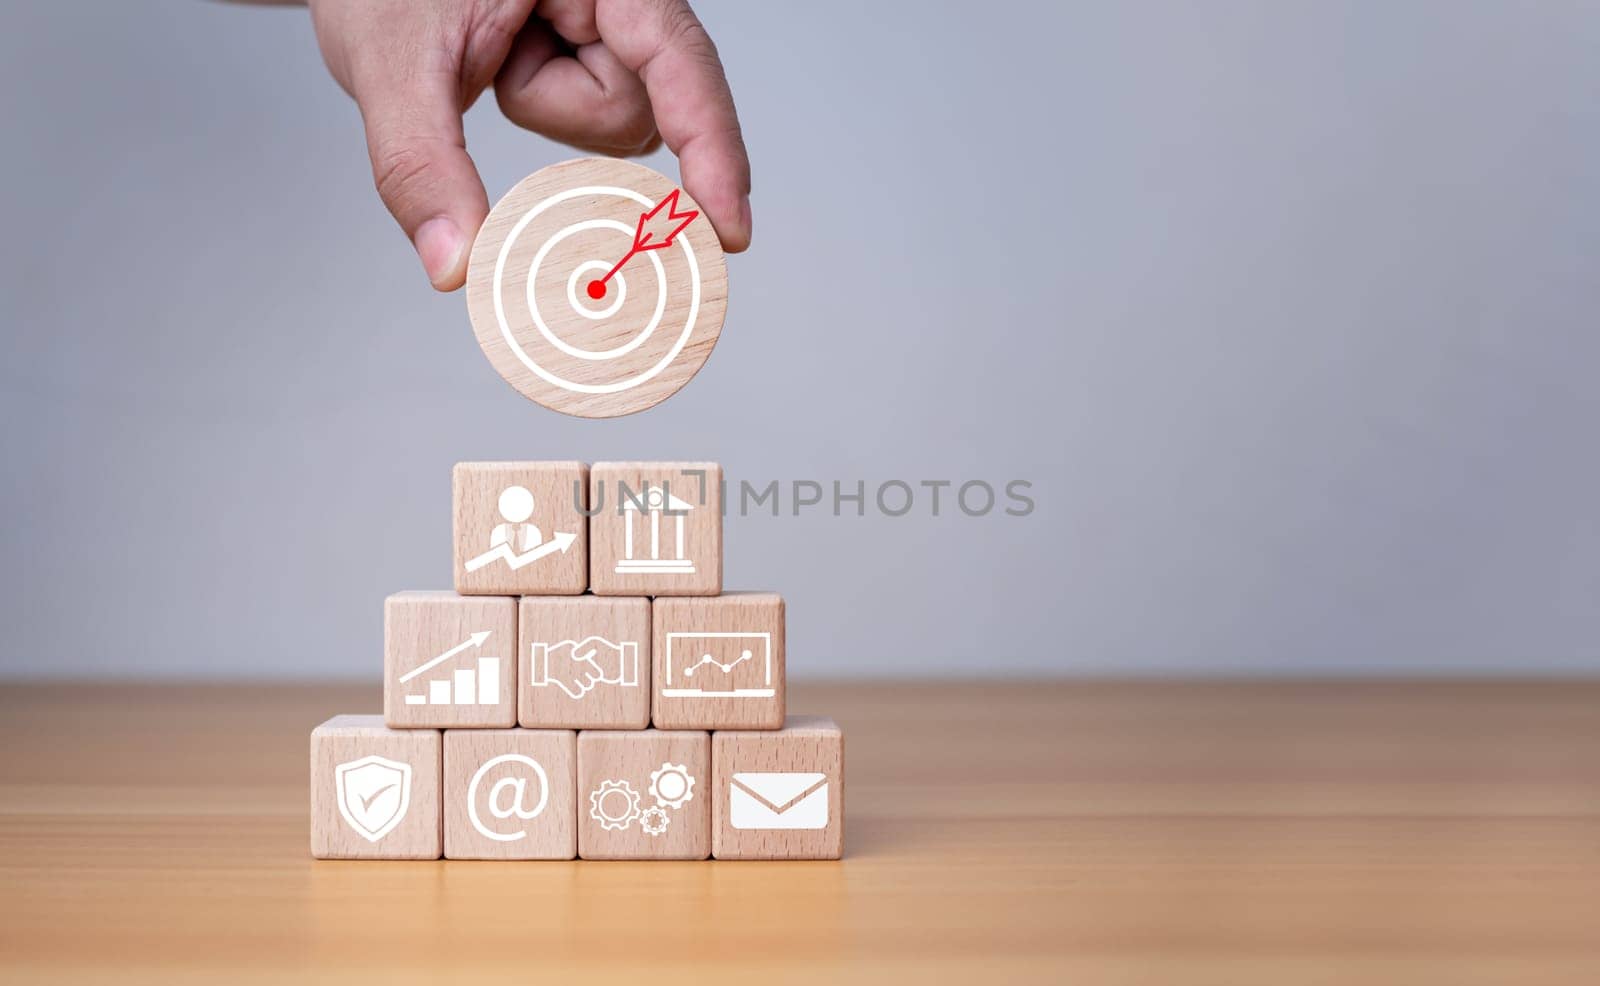 Businessman's hands hold a circular wooden board with printed target icons, business goals and objectives concept, business competition. by Unimages2527